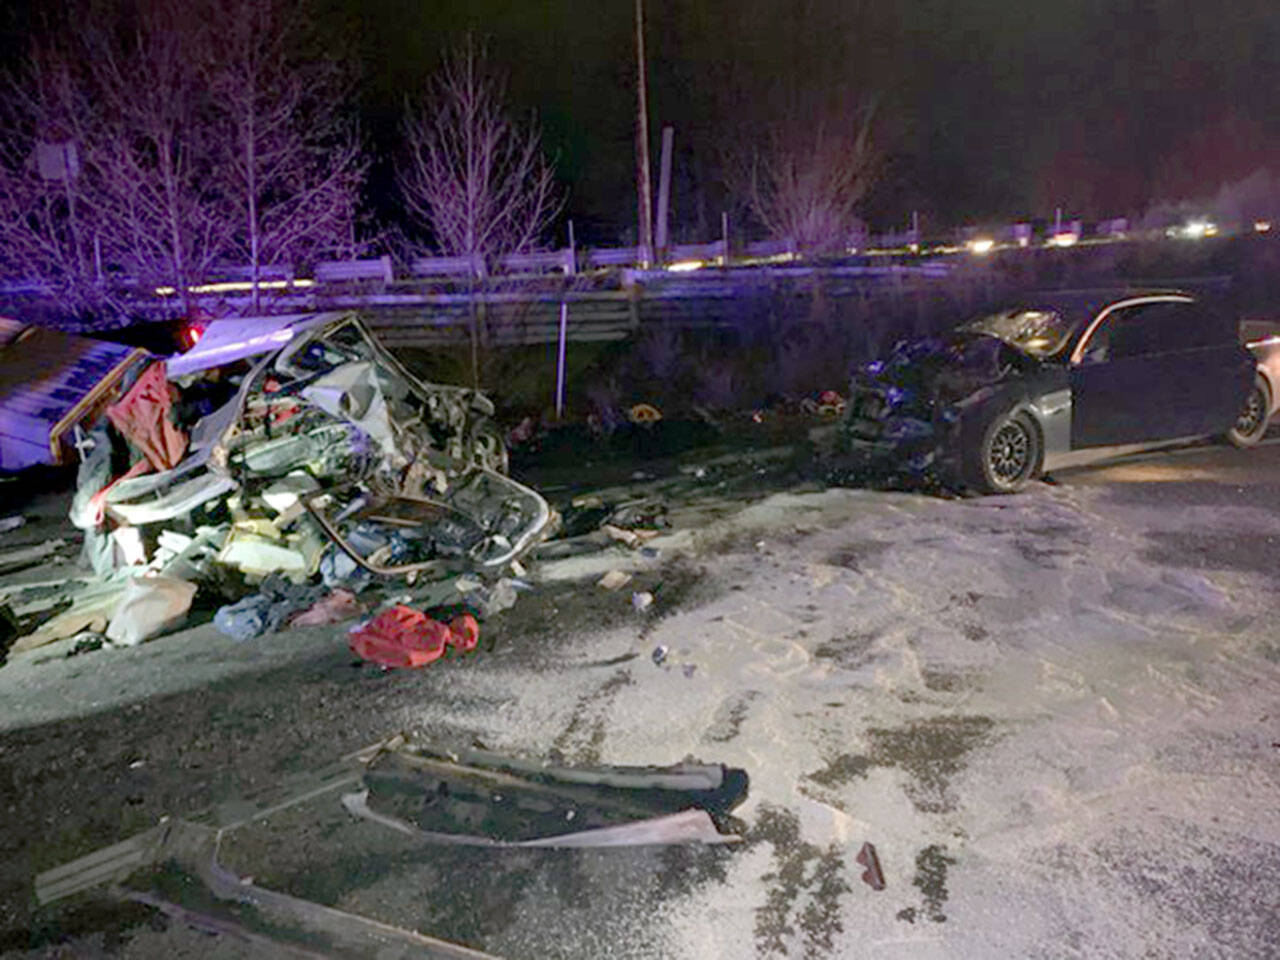 The scene of a fatal crash on northbound I-5 in Arlington Tuesday evening. (Washington State Patrol)